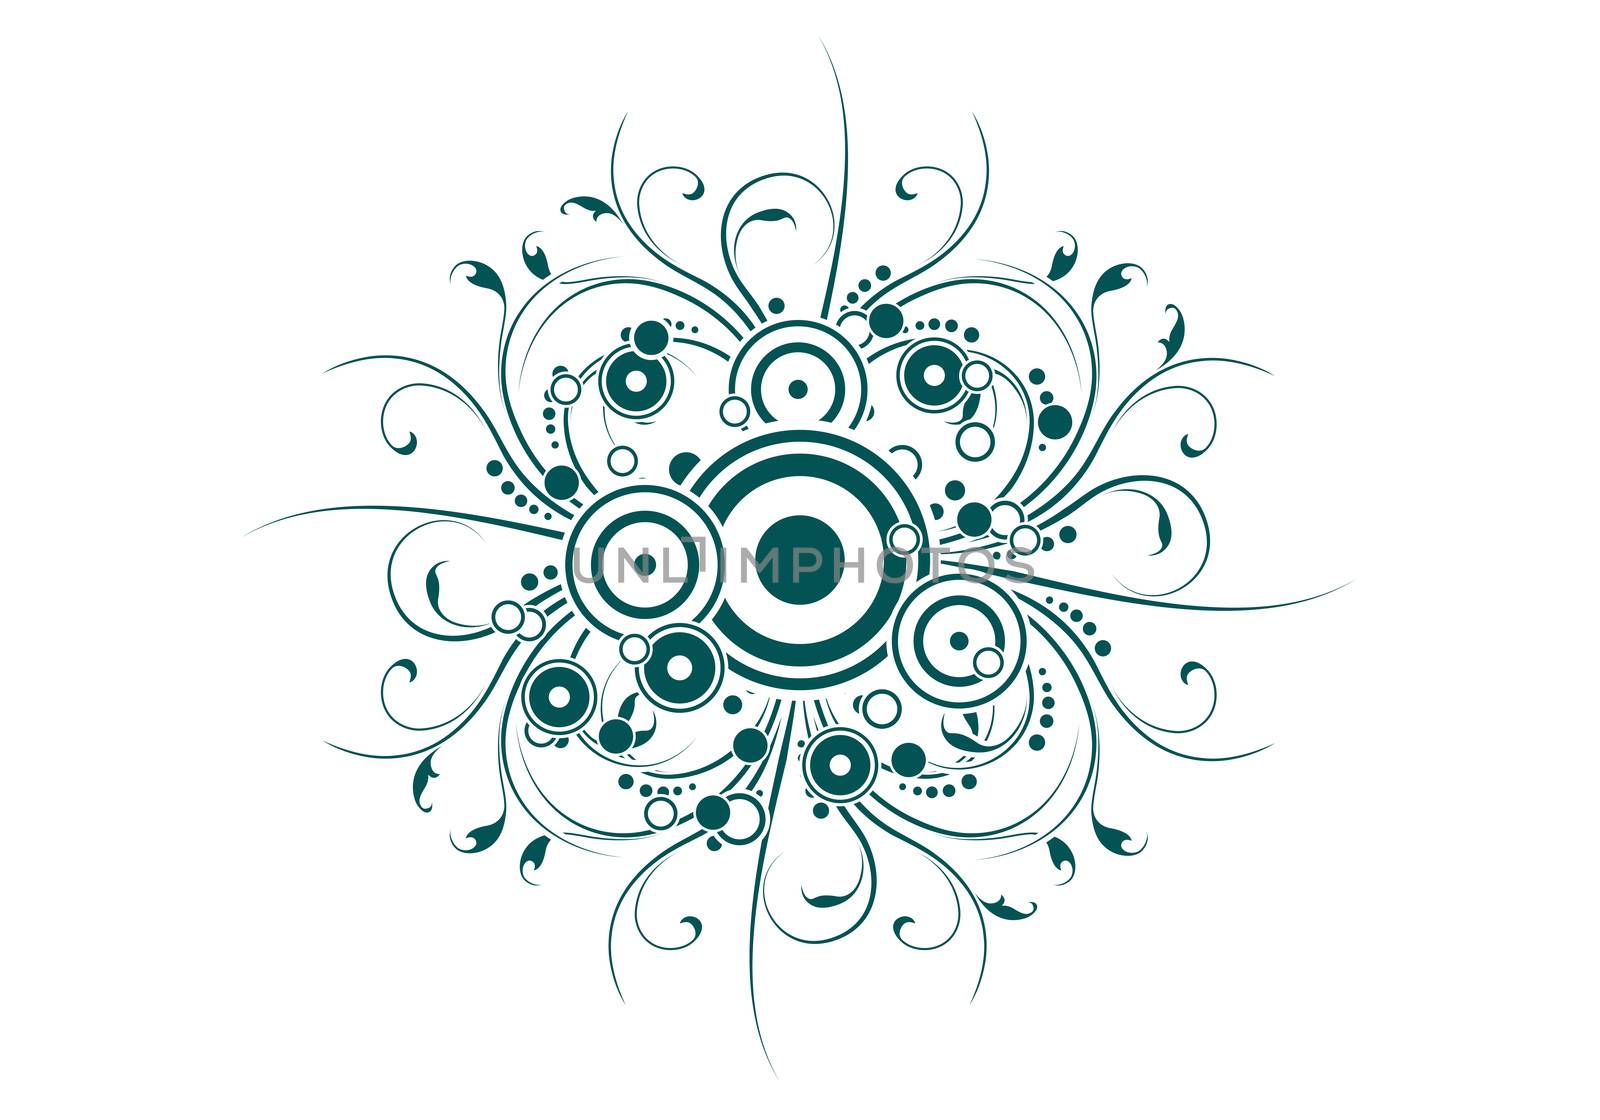 Abstract design with floral scrolls and circles vector illustration